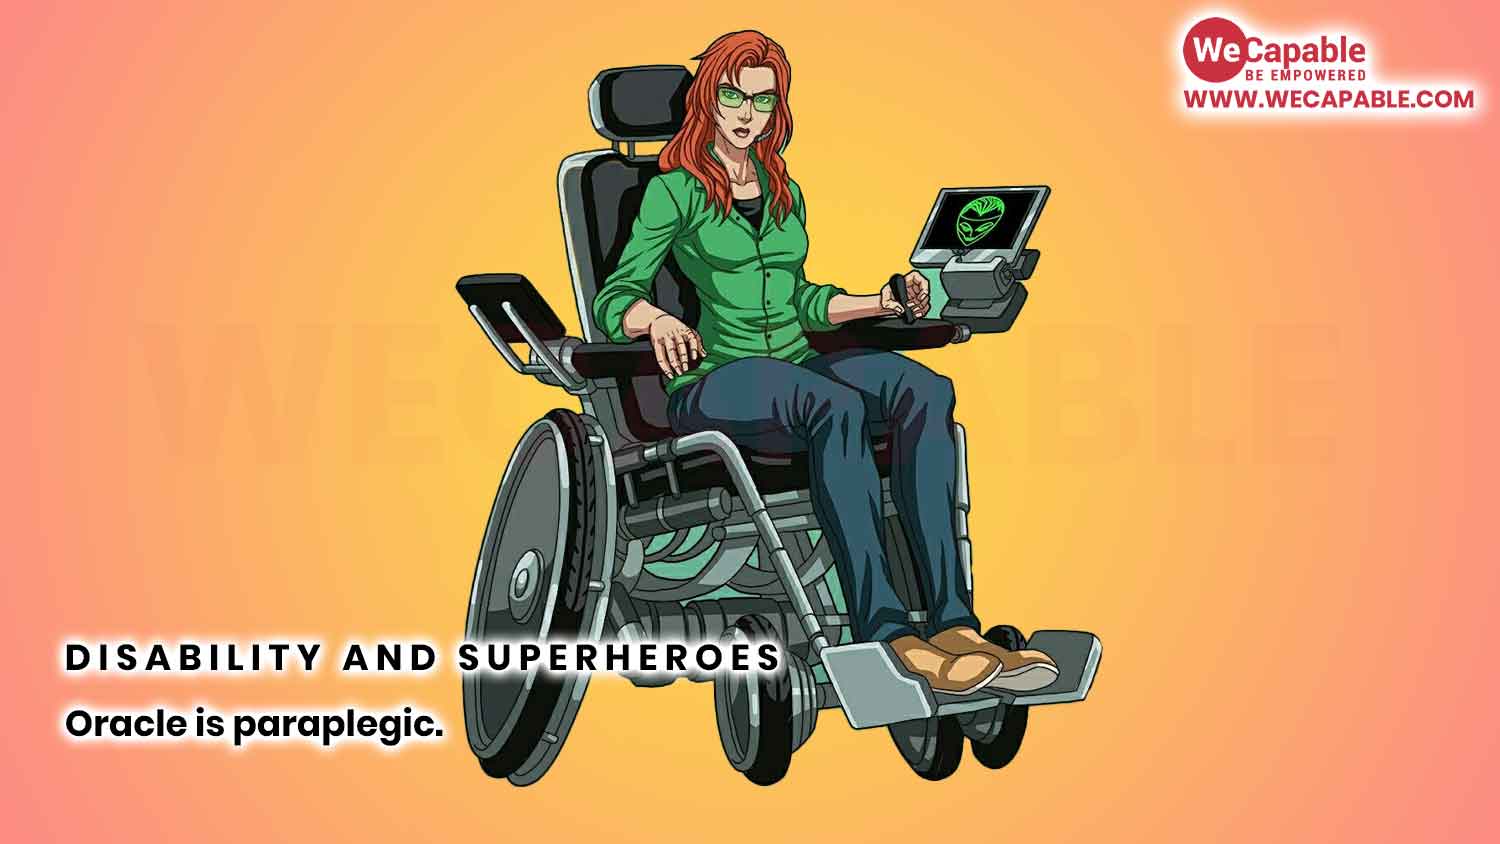 Superhero Oracle has a disability. She is paraplegic and uses a wheelchair.